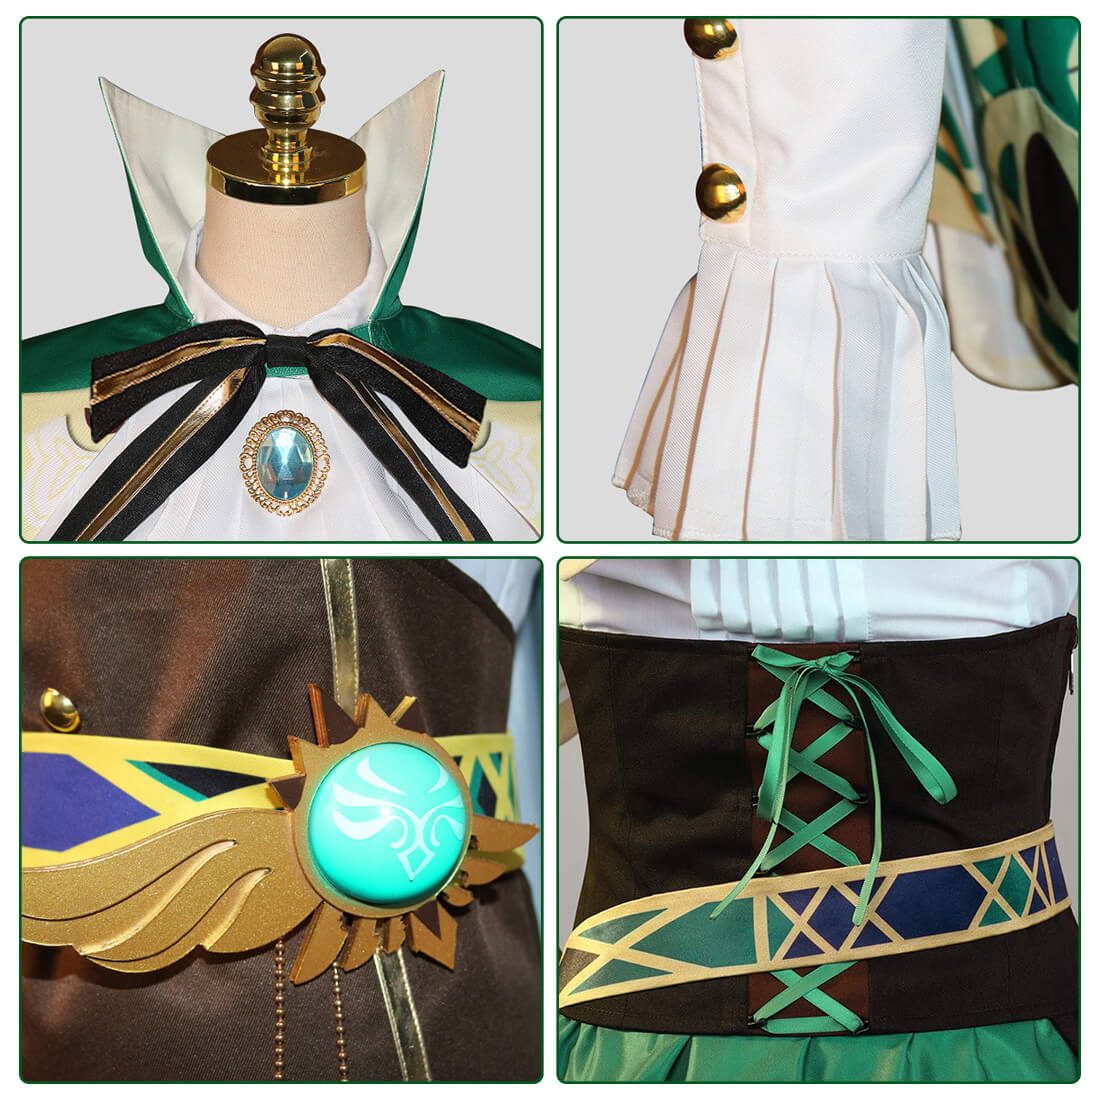 Teens and Adult Venti Cosplay Costume Venti Dress Up Full Set for Halloween Party